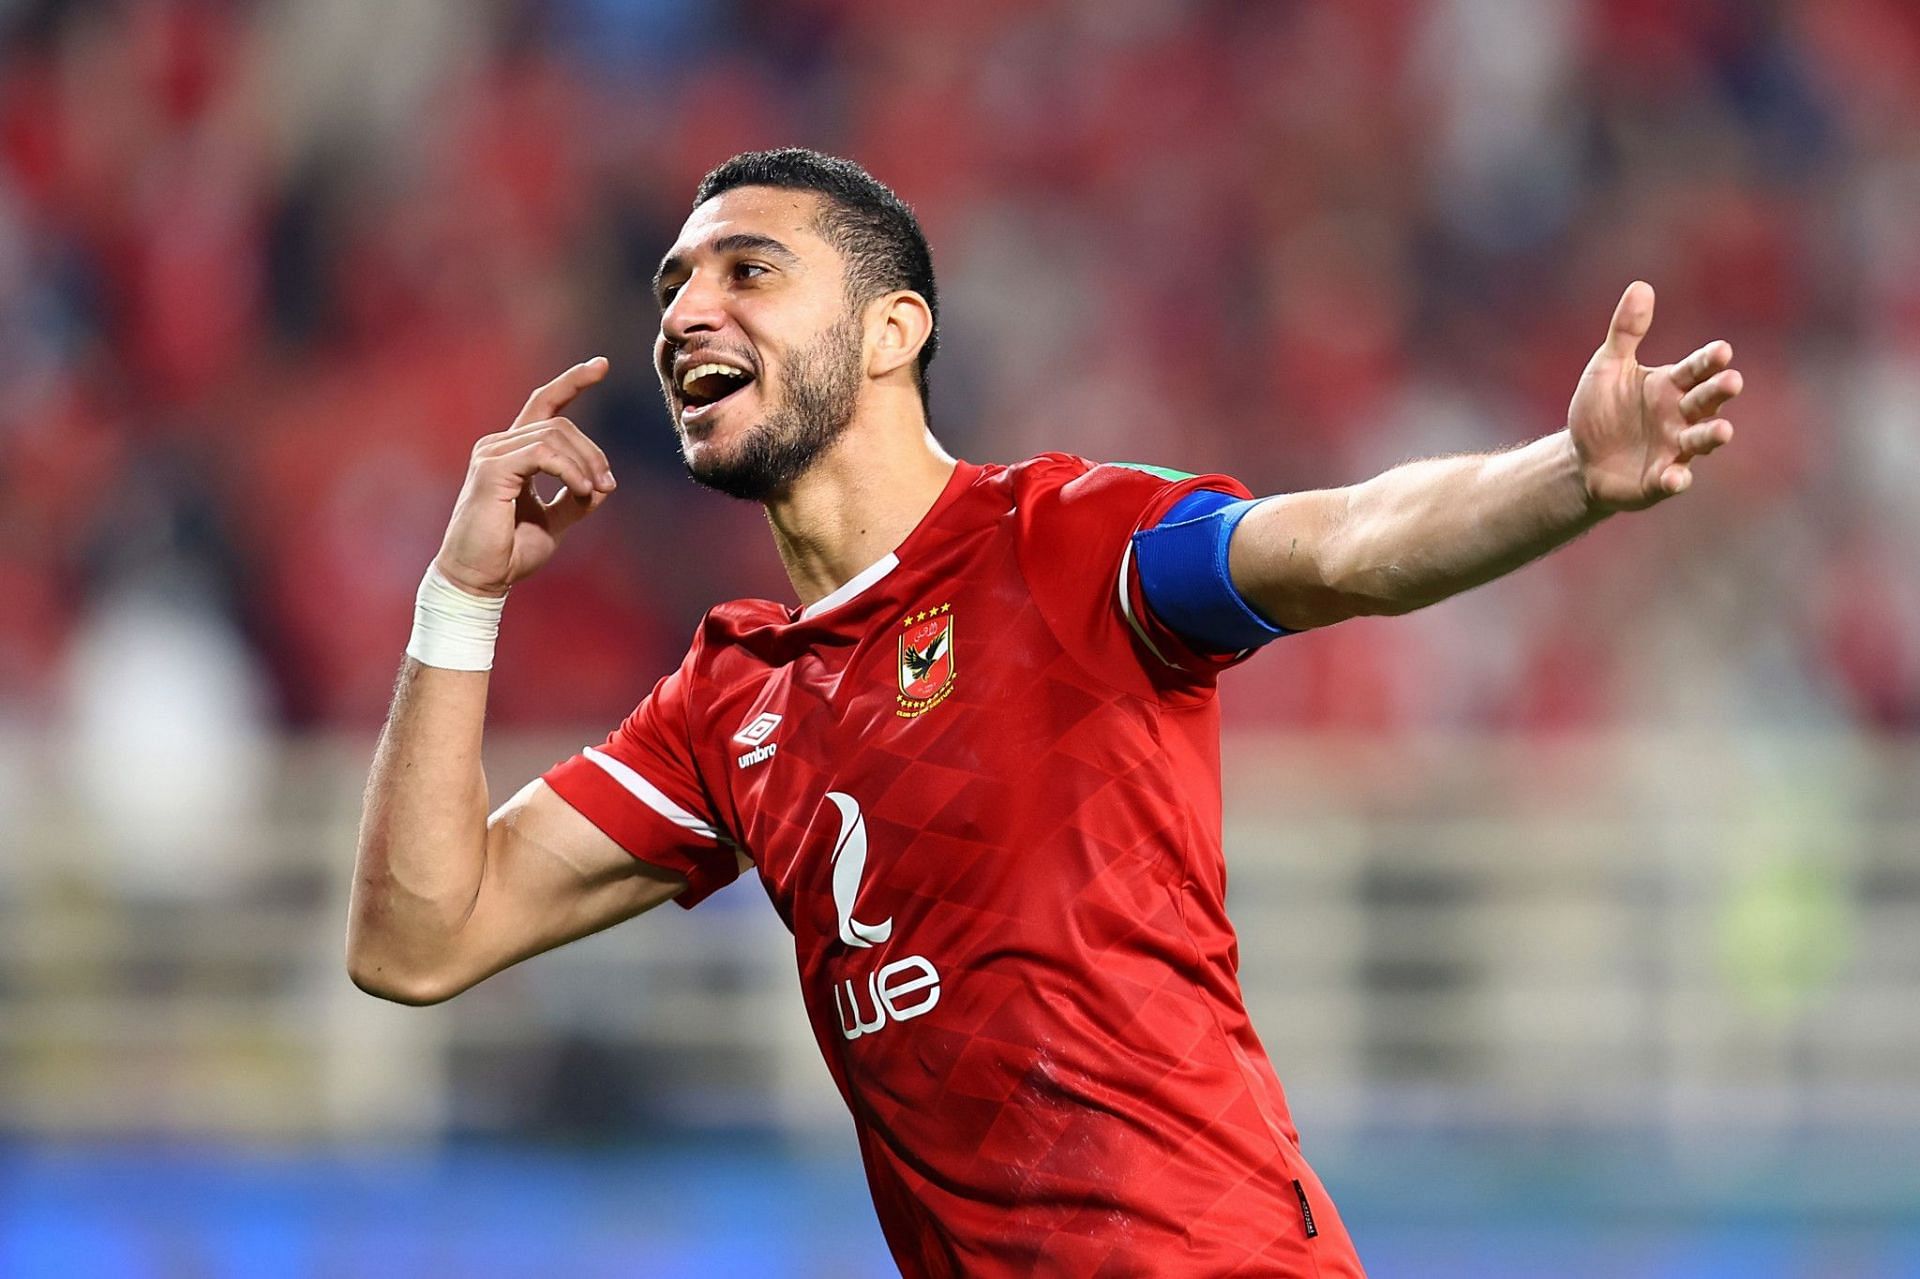 Al Ahly defeated Monterrey to secure a semi-final clash against Palmeiras in the FIFA Club World Cup